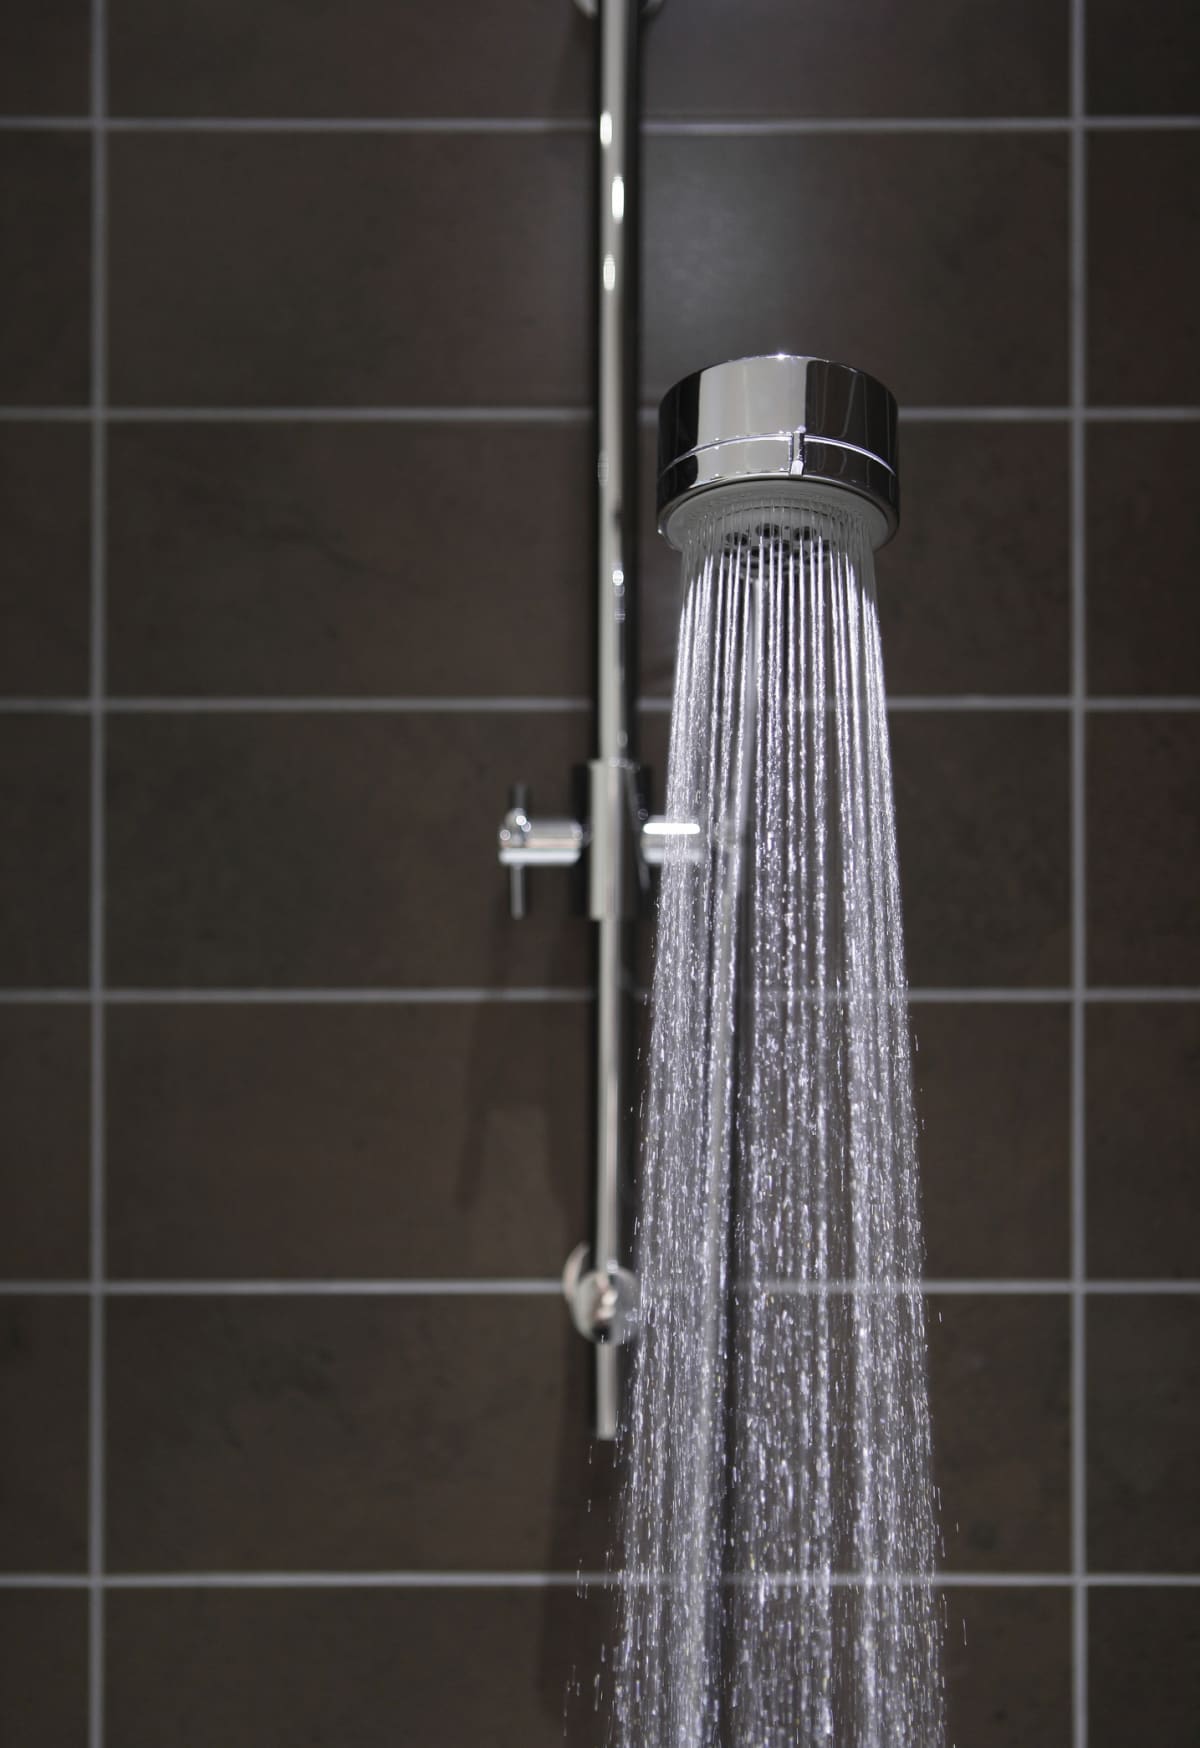 A showerhead with water flowing